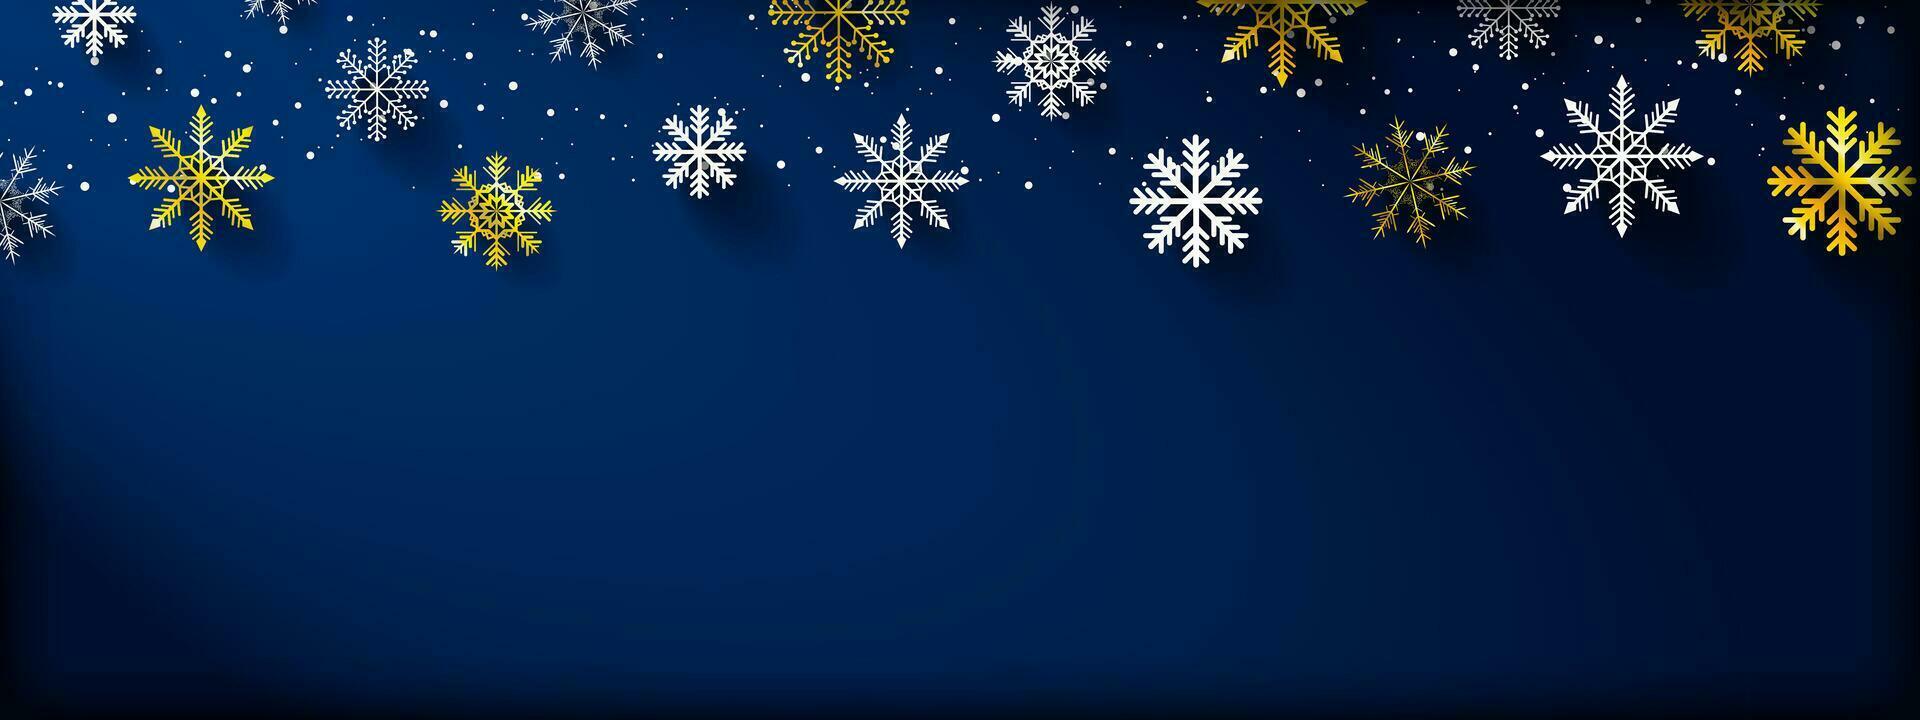 Beautiful Winter Banner with 3d white and gold snowflakes on dark blue background and natural spotlight from corner. Dark Blue Christmas Header with copy space. Vector Illustration. EPS 10.